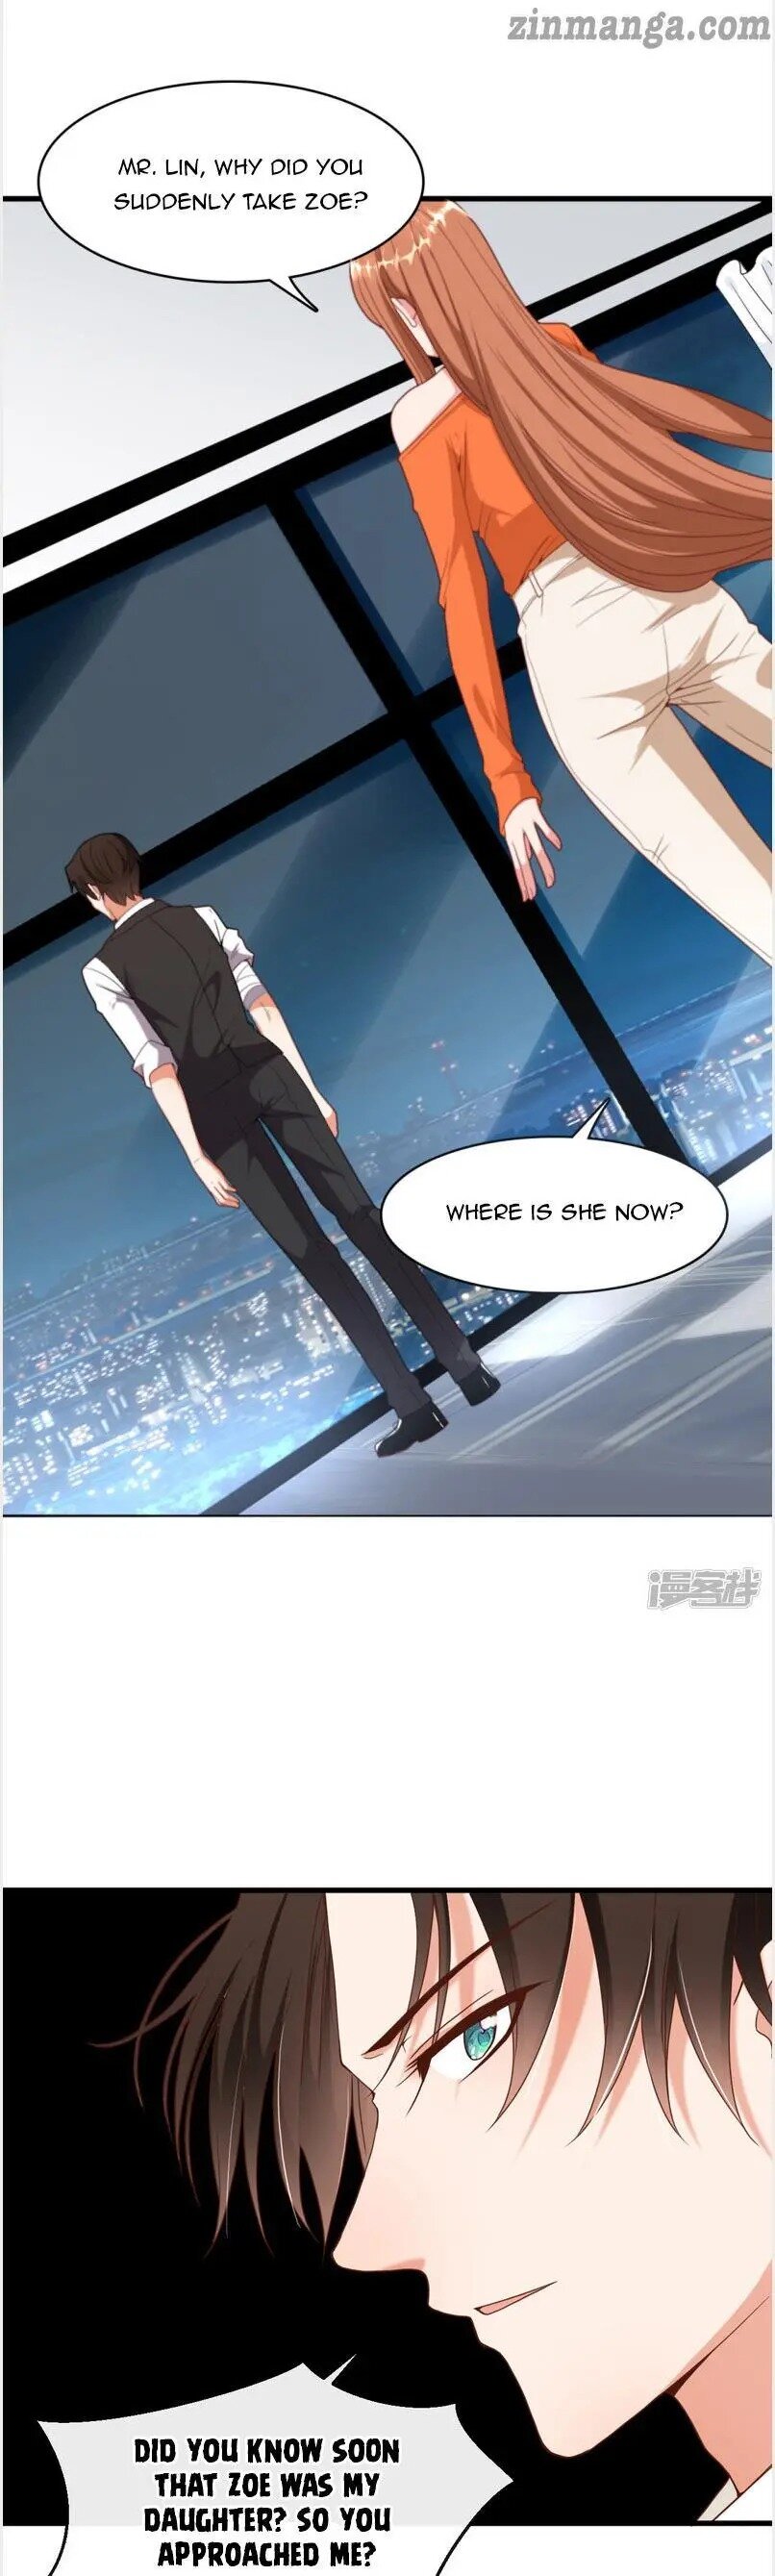 President Daddy Is Chasing You Chapter 12-13 - HolyManga.net